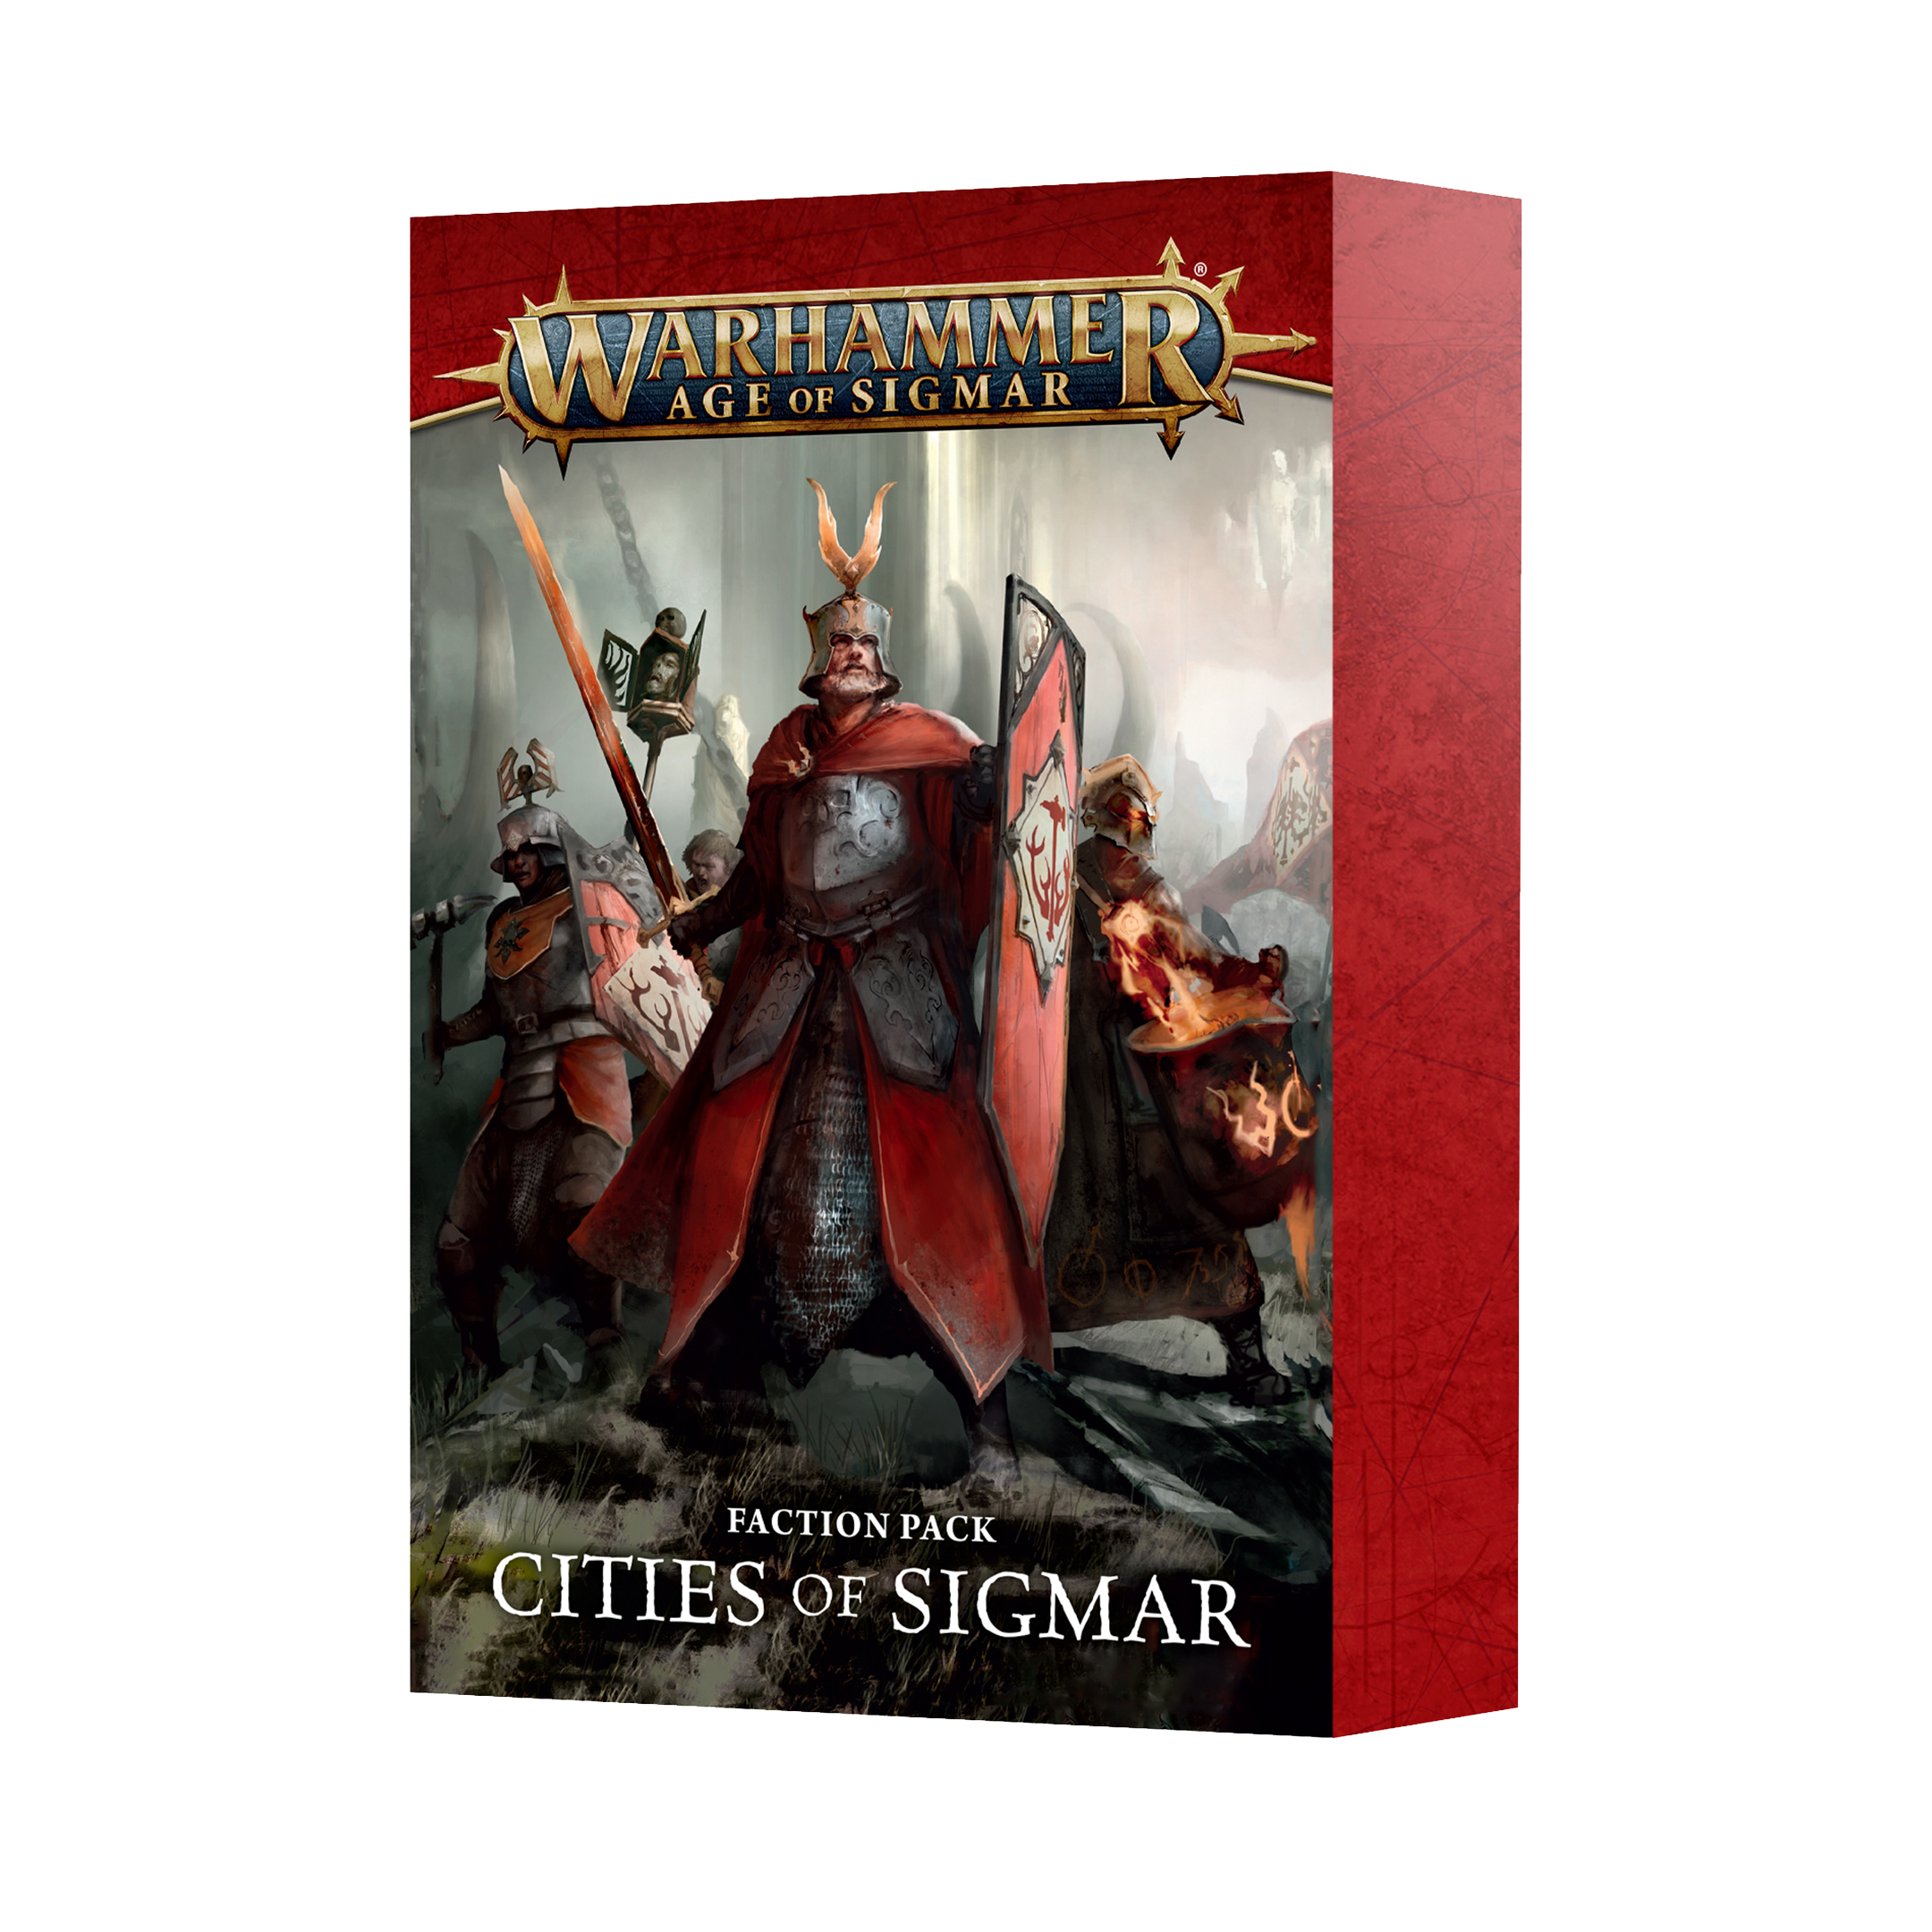 Faction Pack: Cities of Sigmar